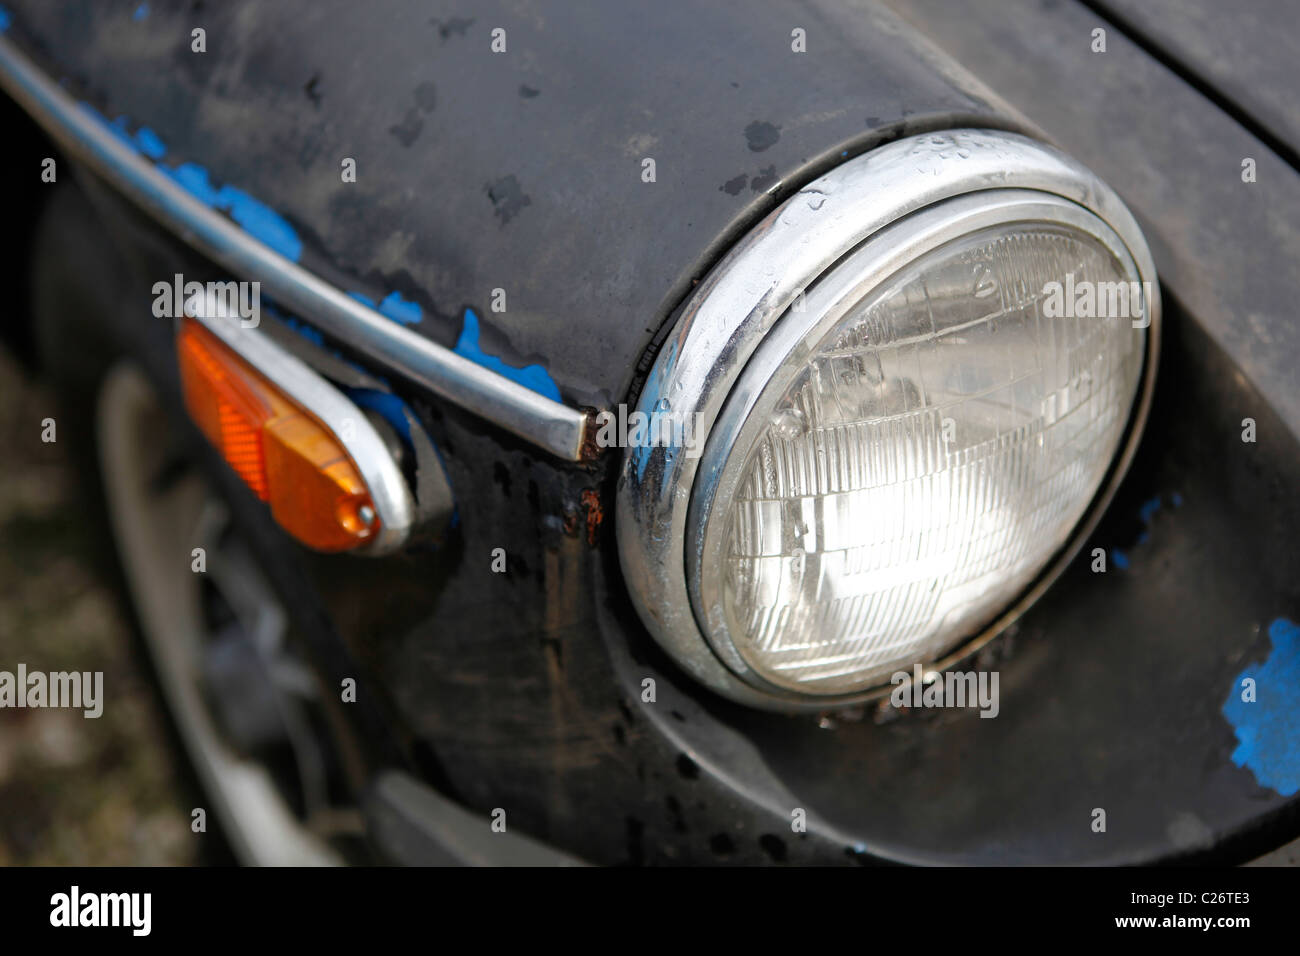 MG British Sportscar sits before auction sale next to a barn in rural Indiana. sports car headlight Stock Photo